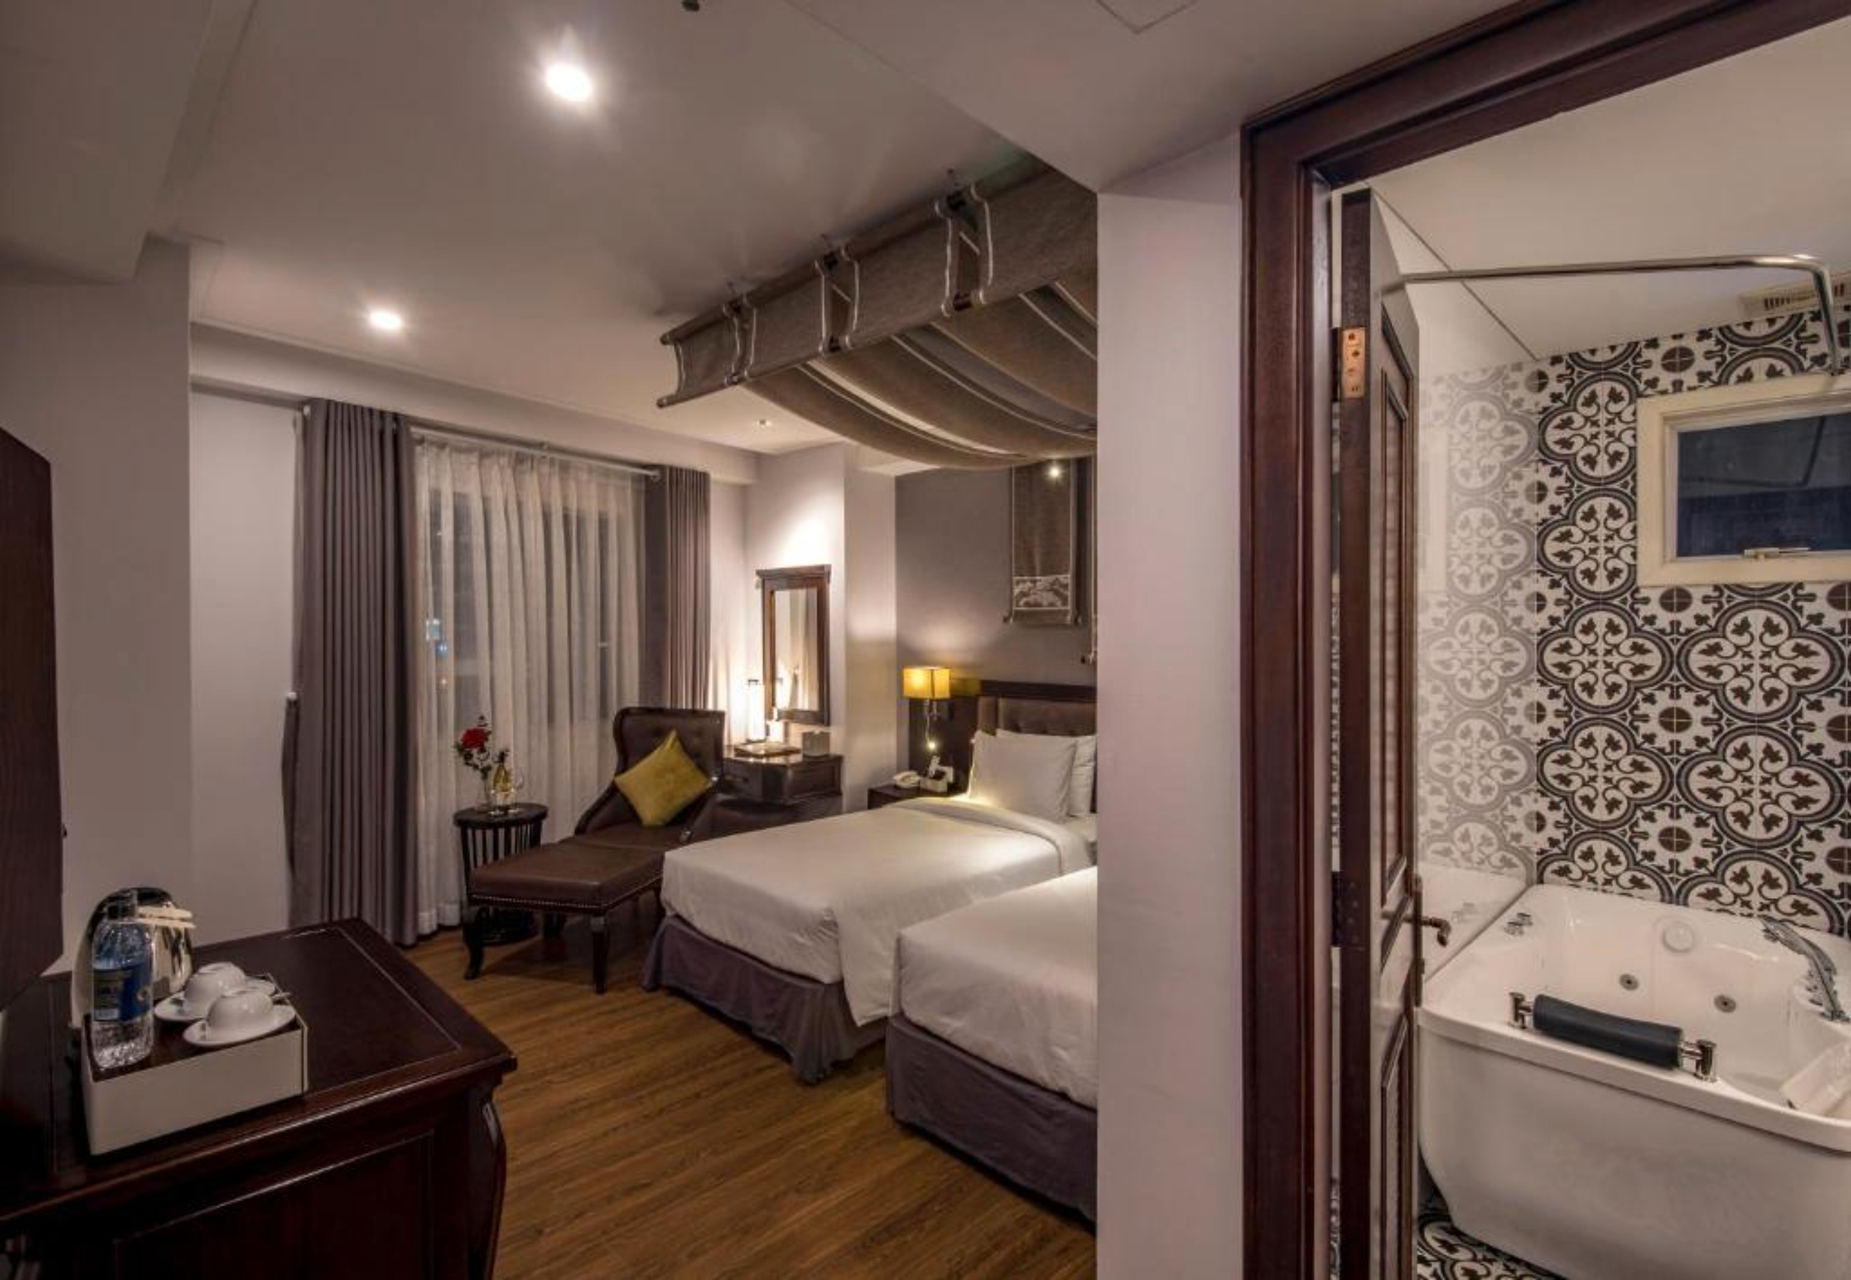 Bedroom 3, The Odys Boutique Hotel, Quận 1